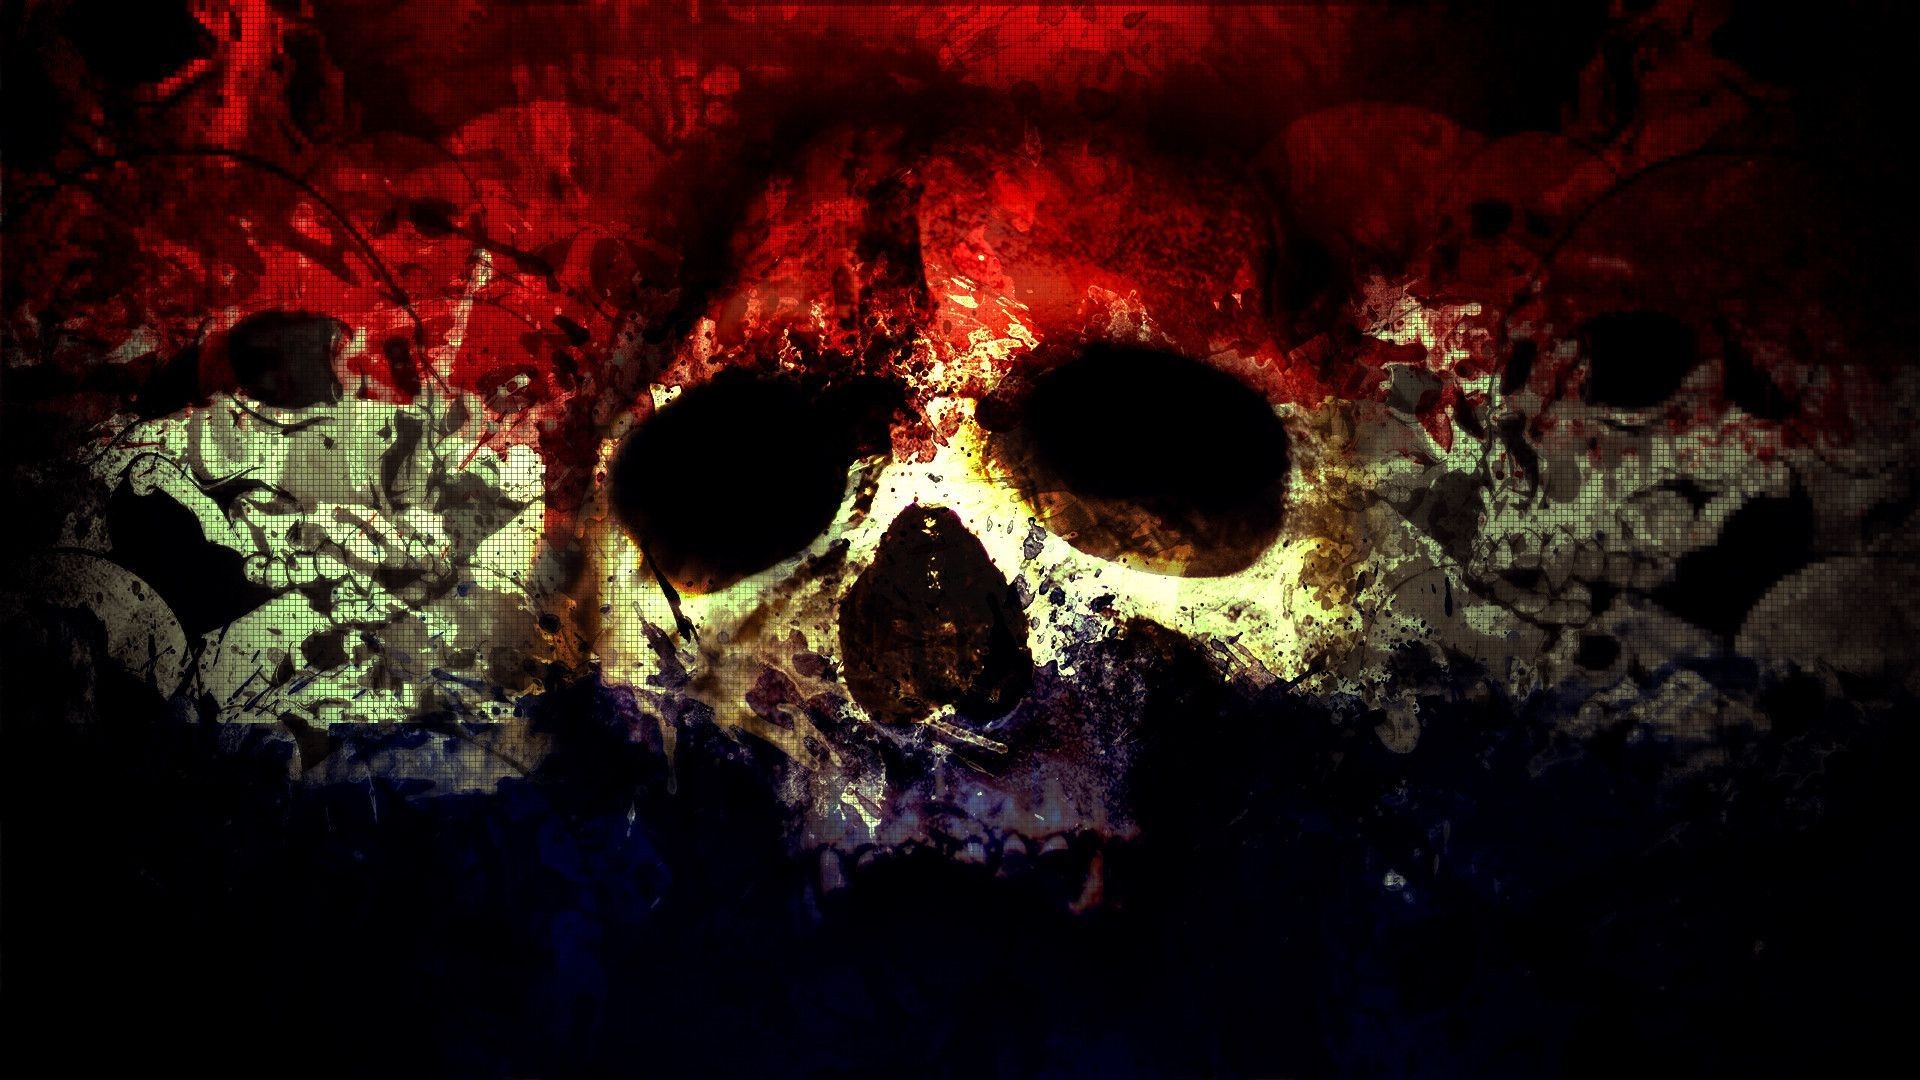 1920x1080 Collection of Skull Wallpaper Hd on HDWallpapers Skull Wallpaper Hd  Wallpapers)